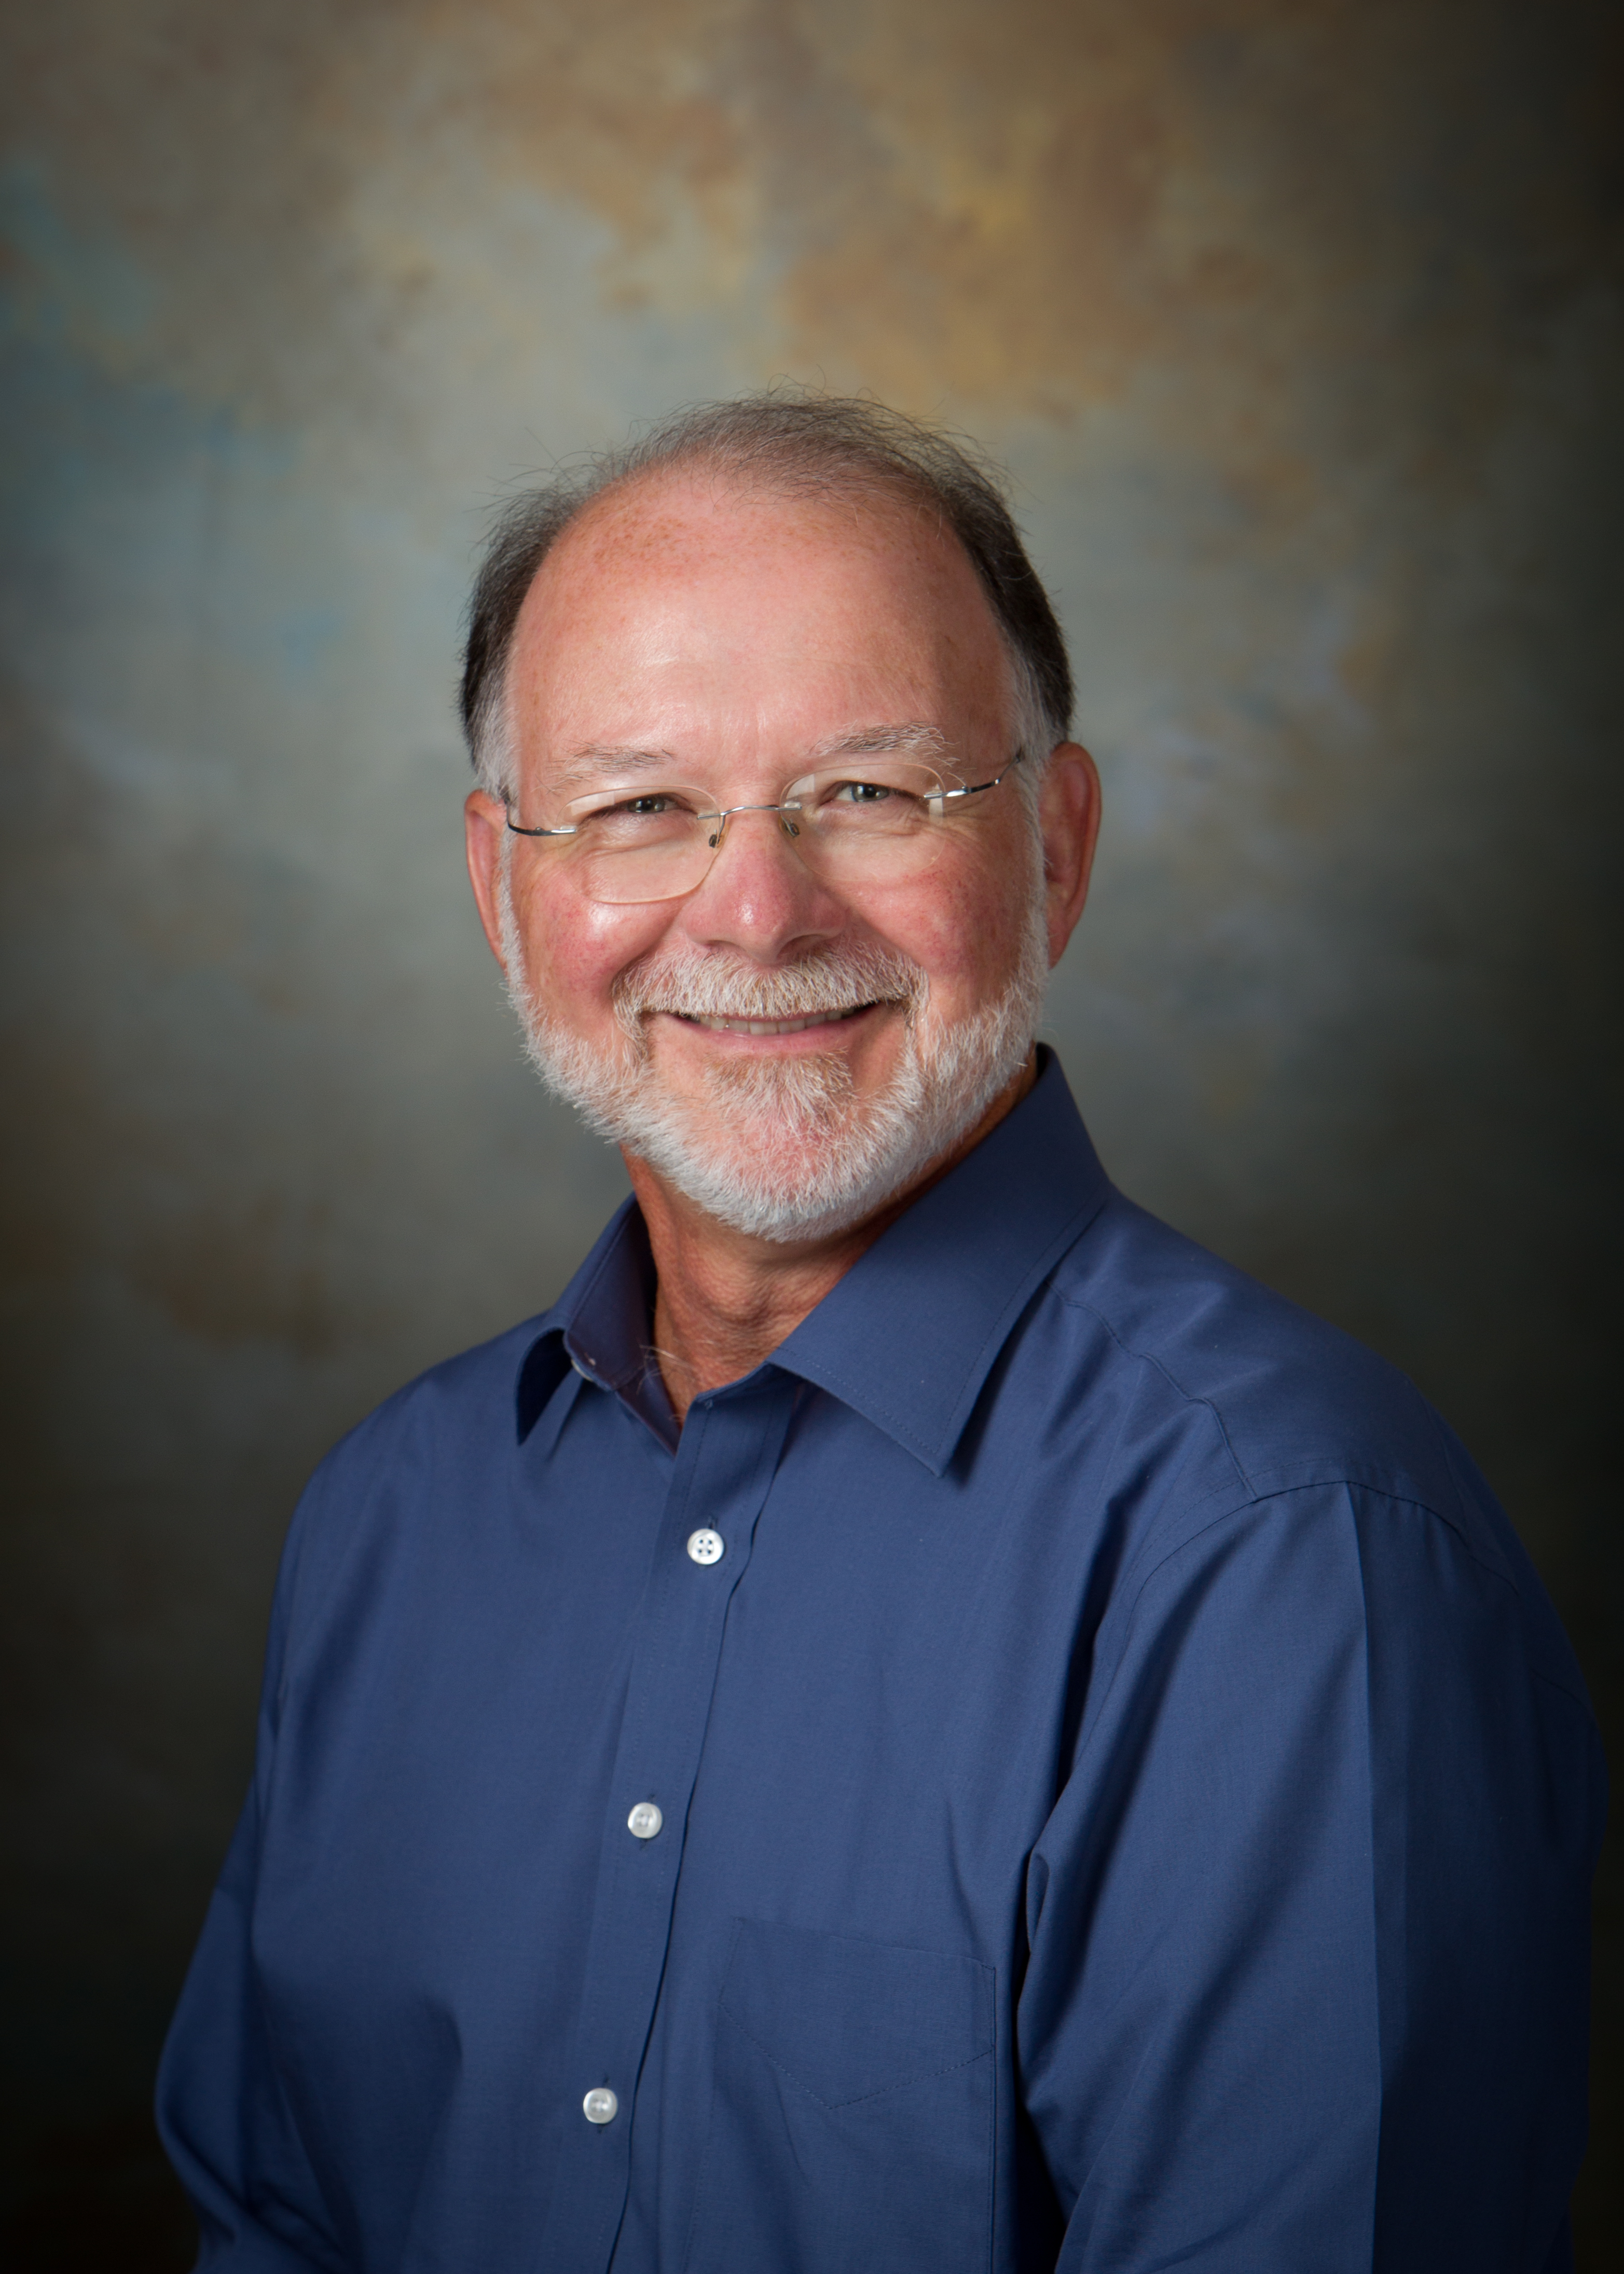 headshot of Tom Williams retired consultant in a blue dress shirt